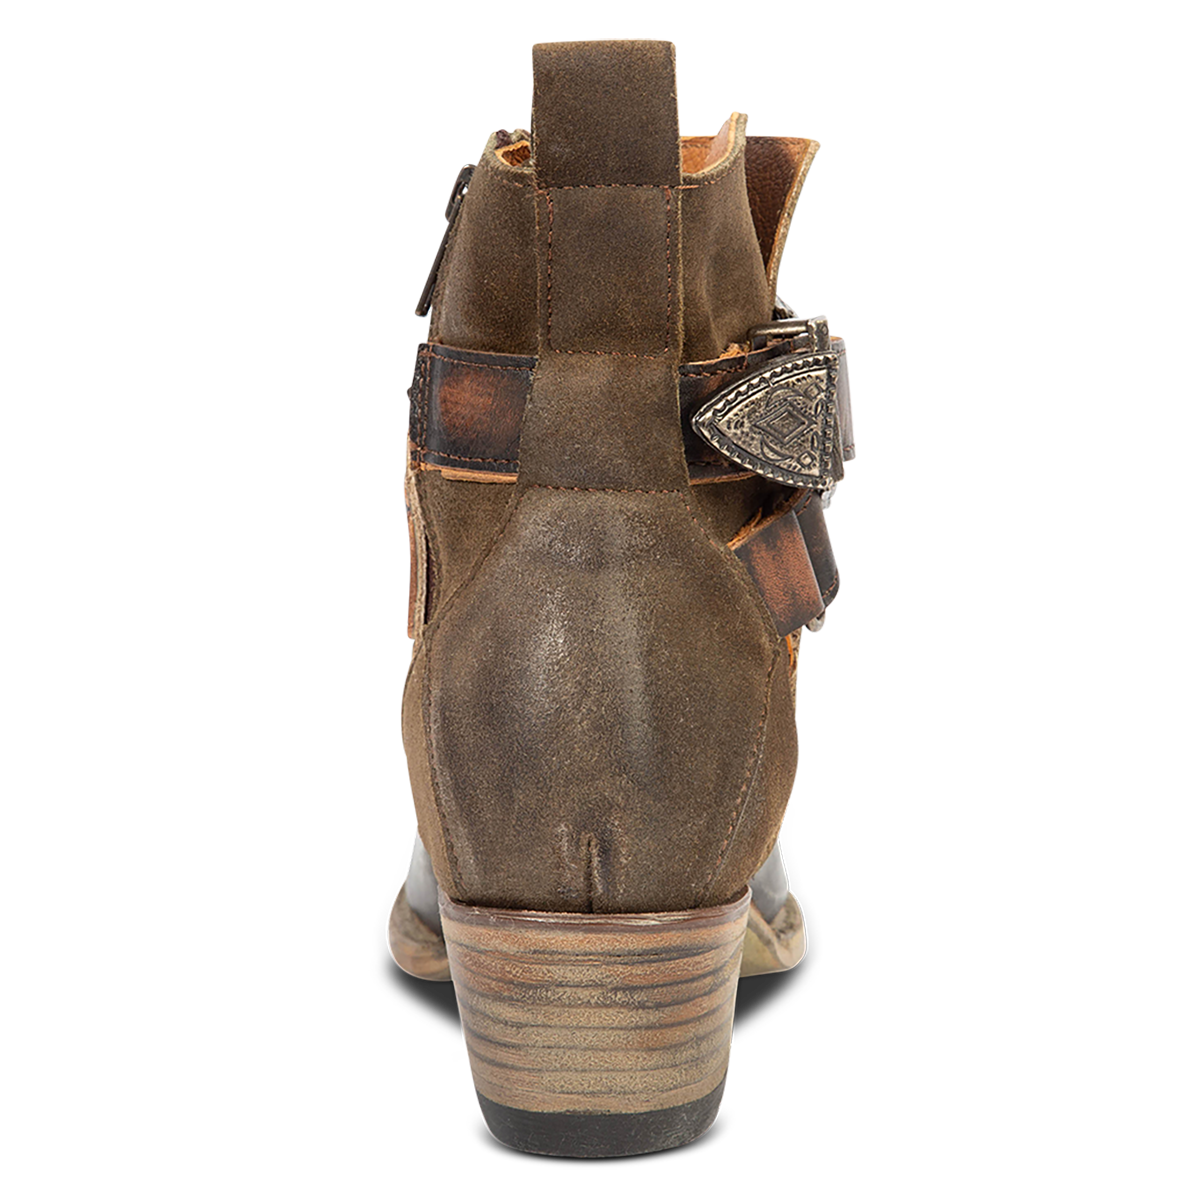 Back view showing low heel and pull strap on FREEBIRD women's Whip cogolivenac leather western ankle bootie